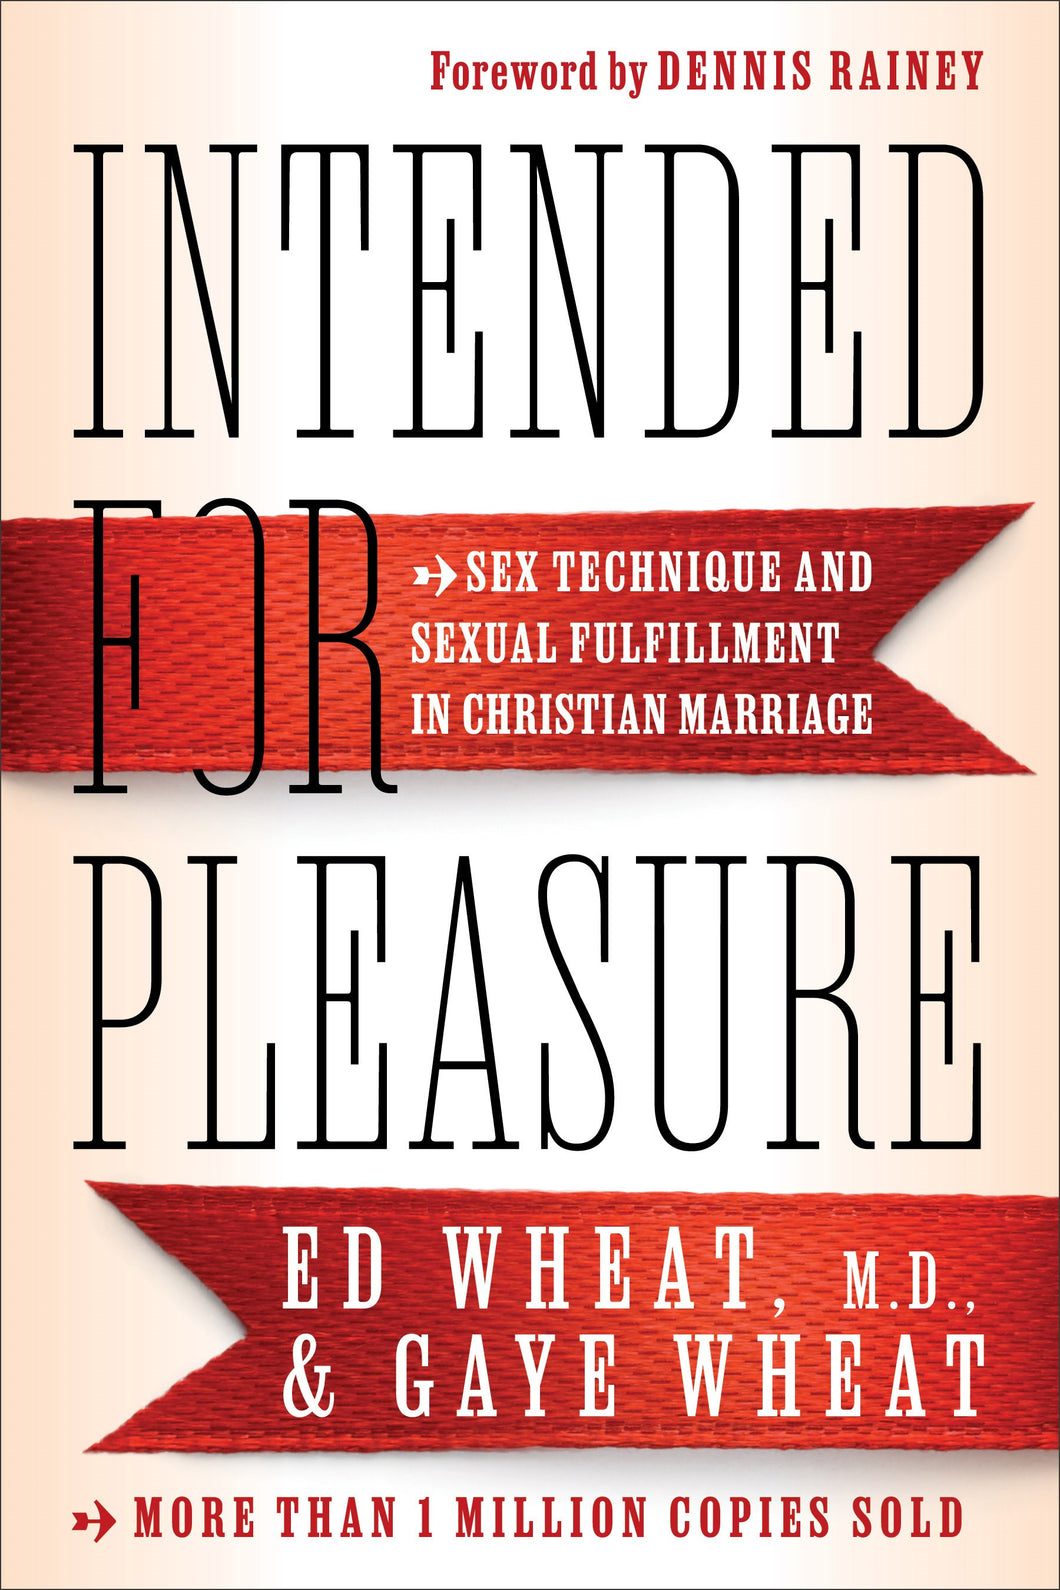 Intended For Pleasure (4th Edition)